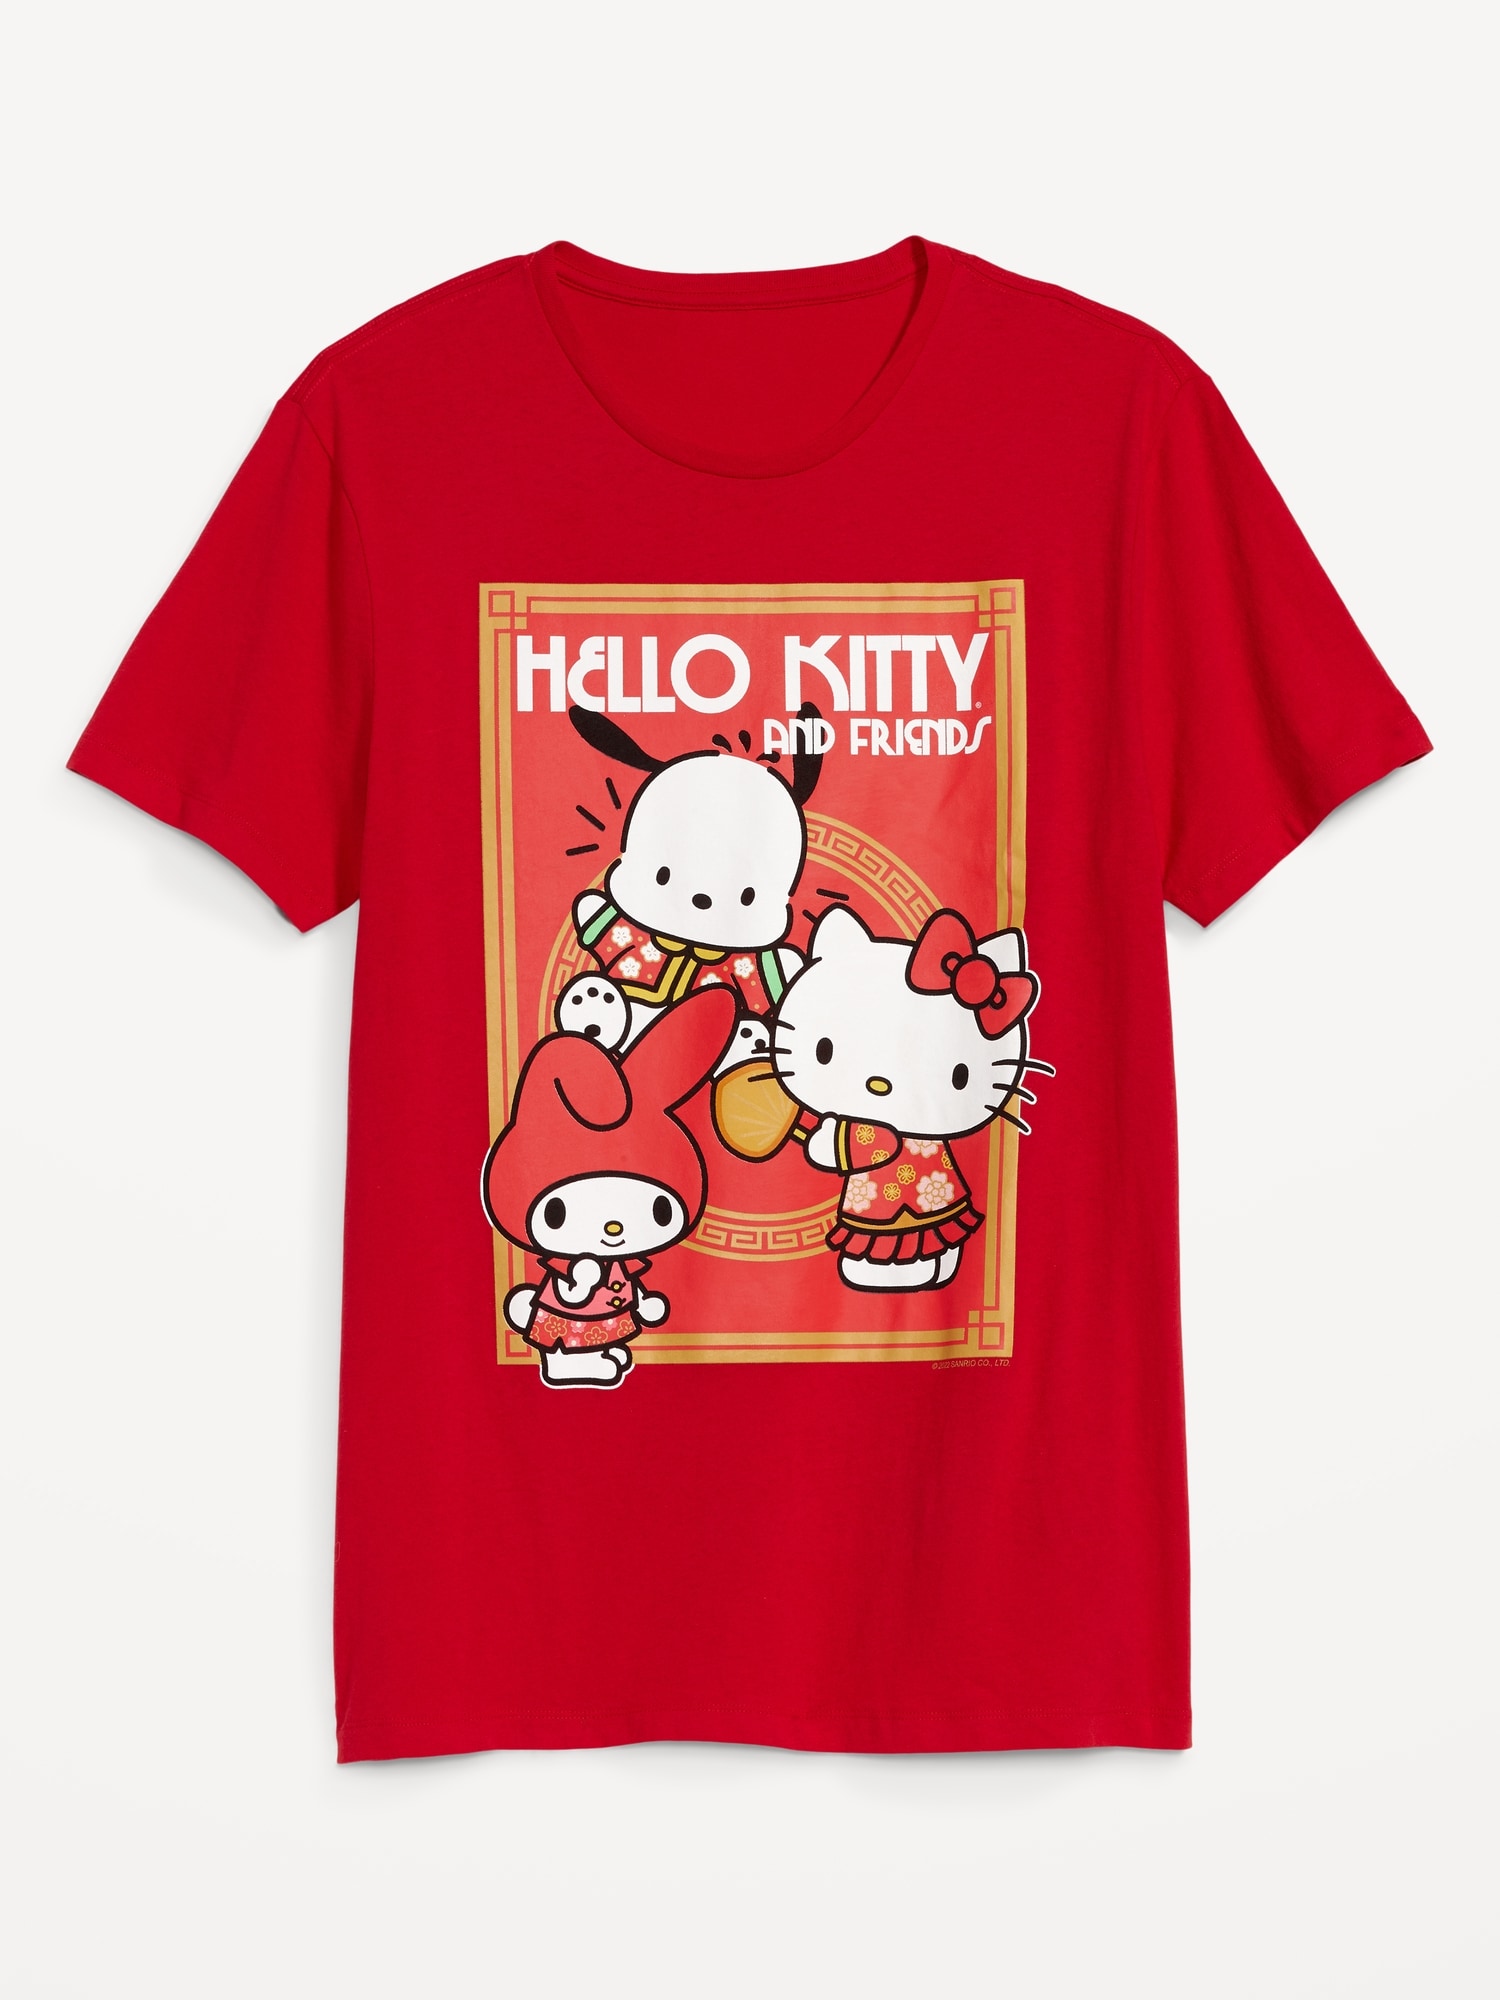 Hello Kitty® and Friends Gender-Neutral T-Shirt for Adults | Old Navy